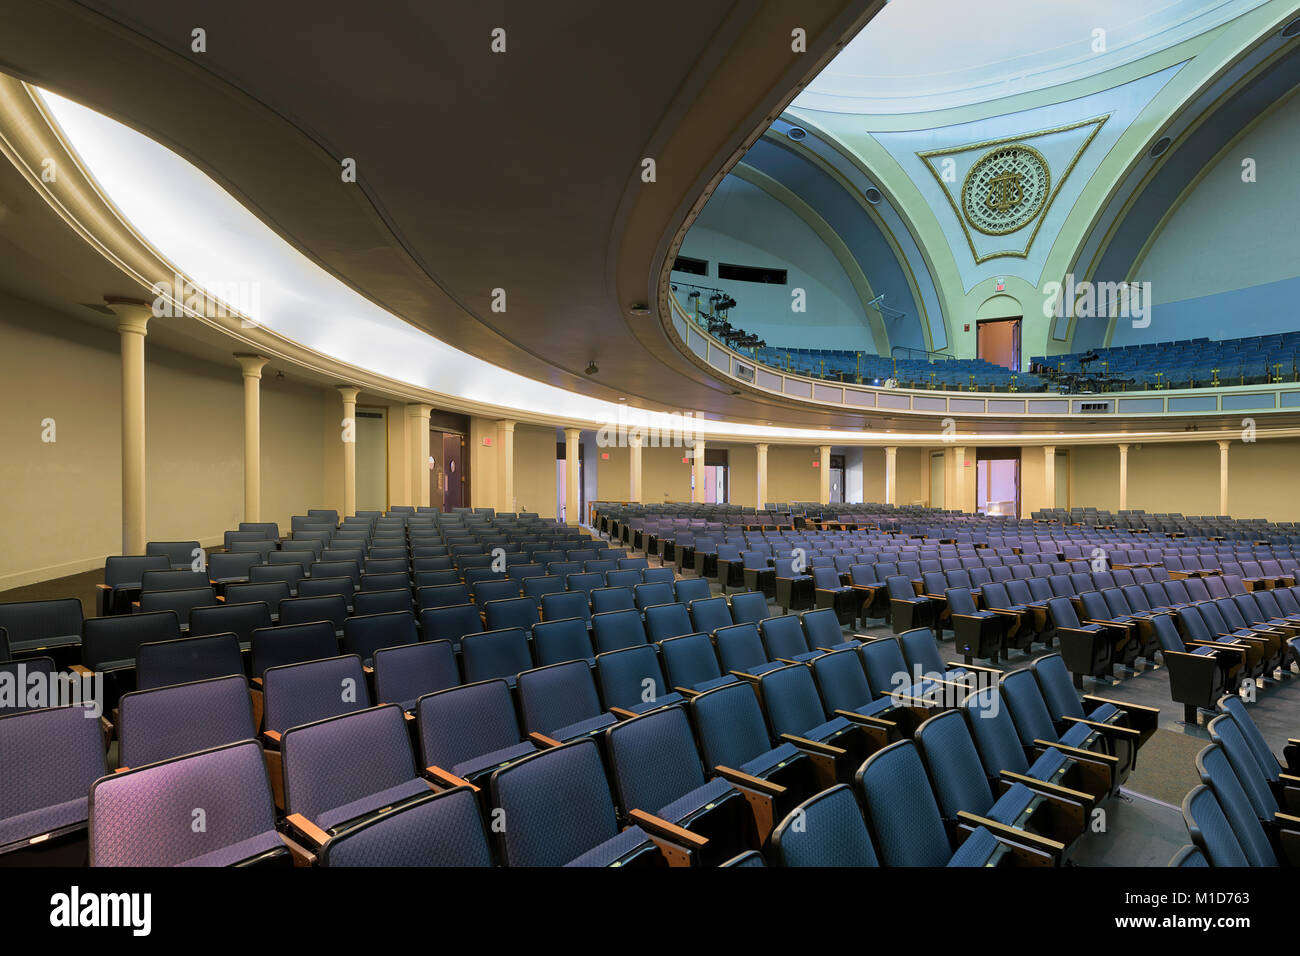 Interior of the Foellinger Auditorium (opened in 1907) on the campus of the University of Illinois at Urbana-Champaign in Urbana, Illinois Stock Photo